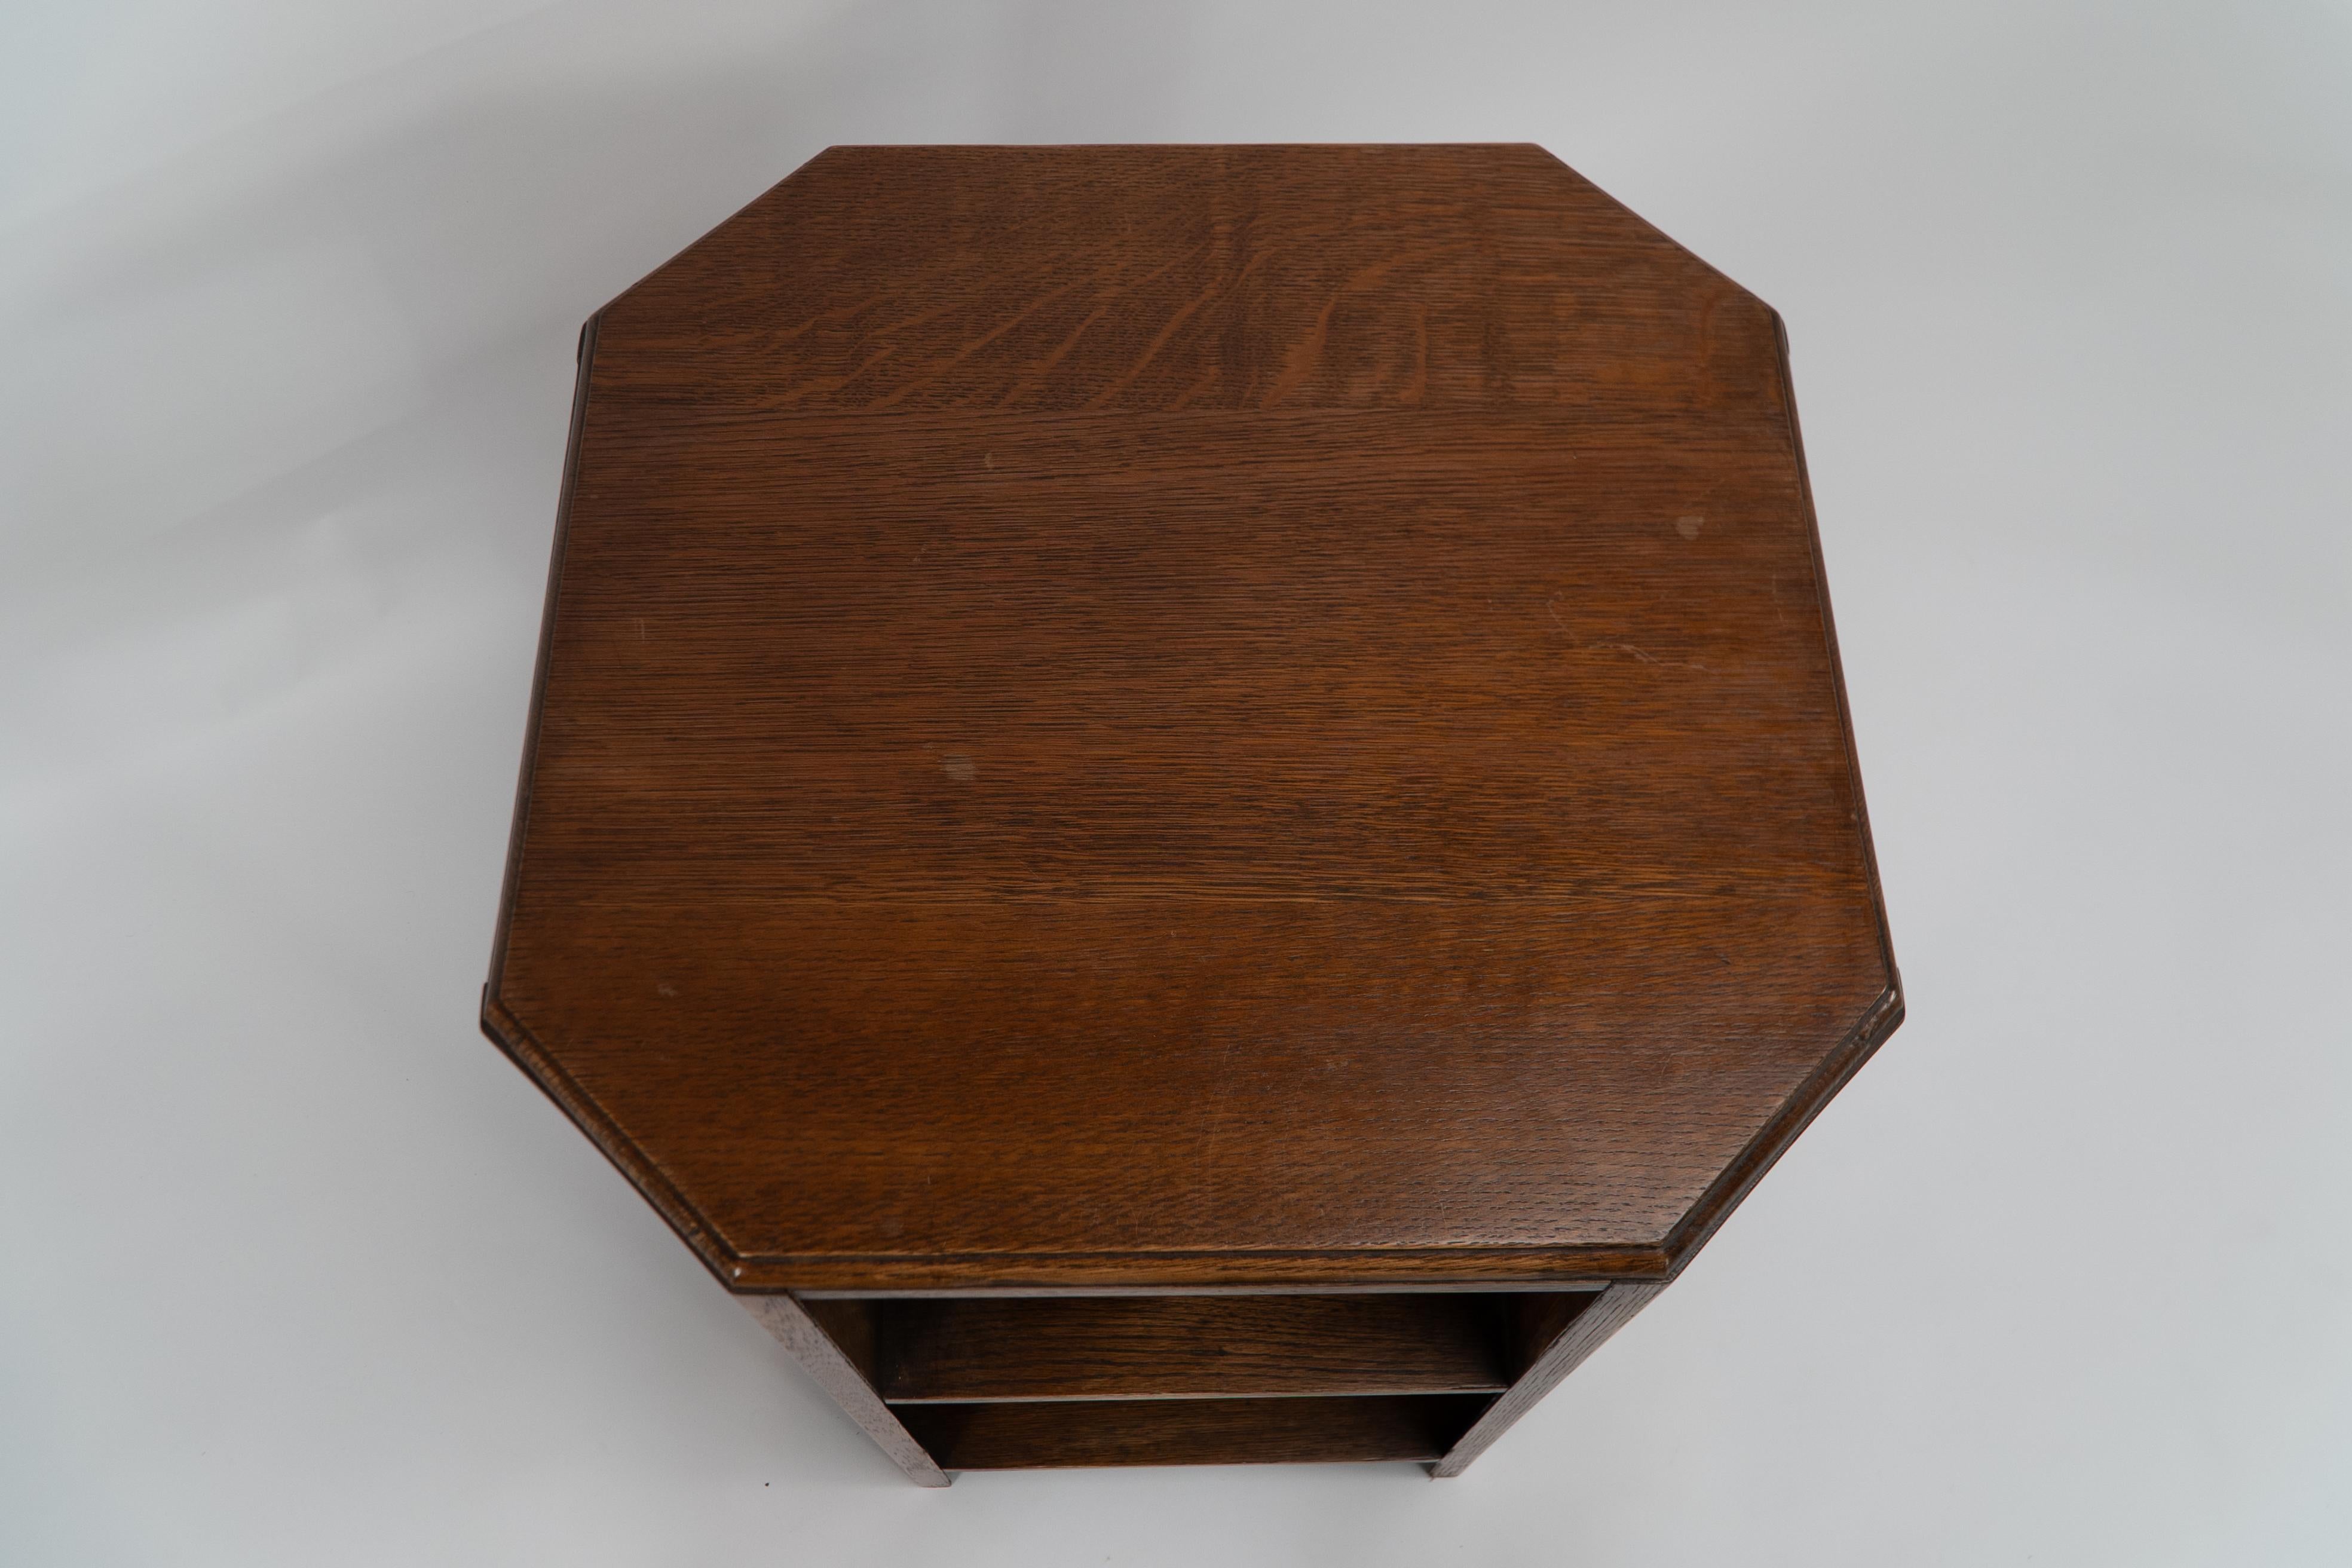 English Heals. Arts & Crafts oak octagonal coffee or side table with lower book shelves.